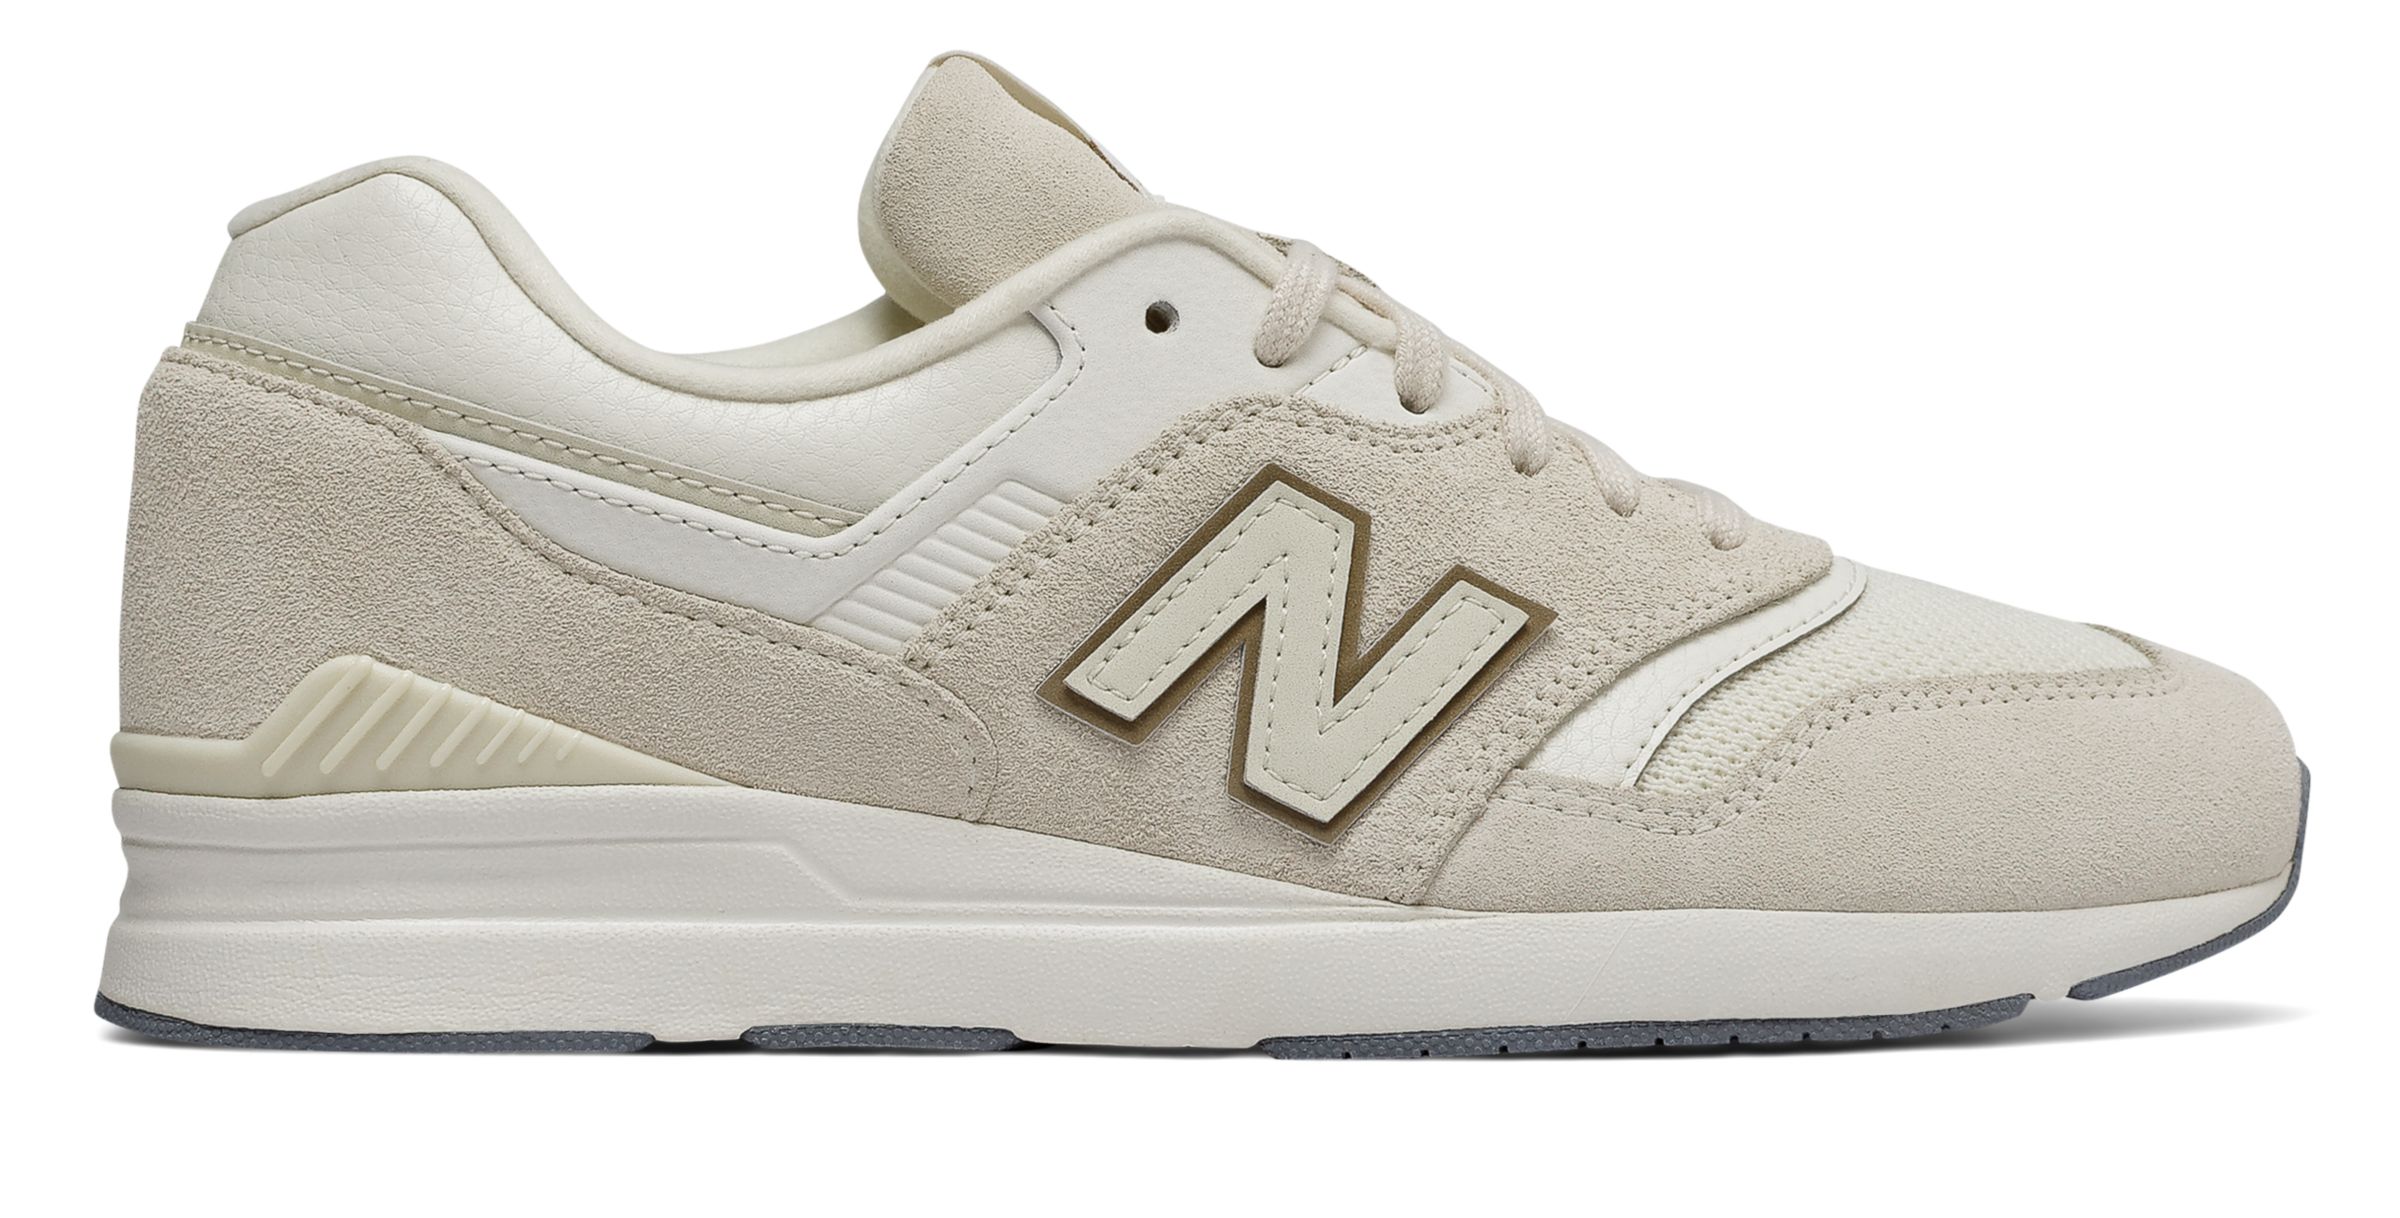 Off on WL697CD at Joe's New Balance Outlet